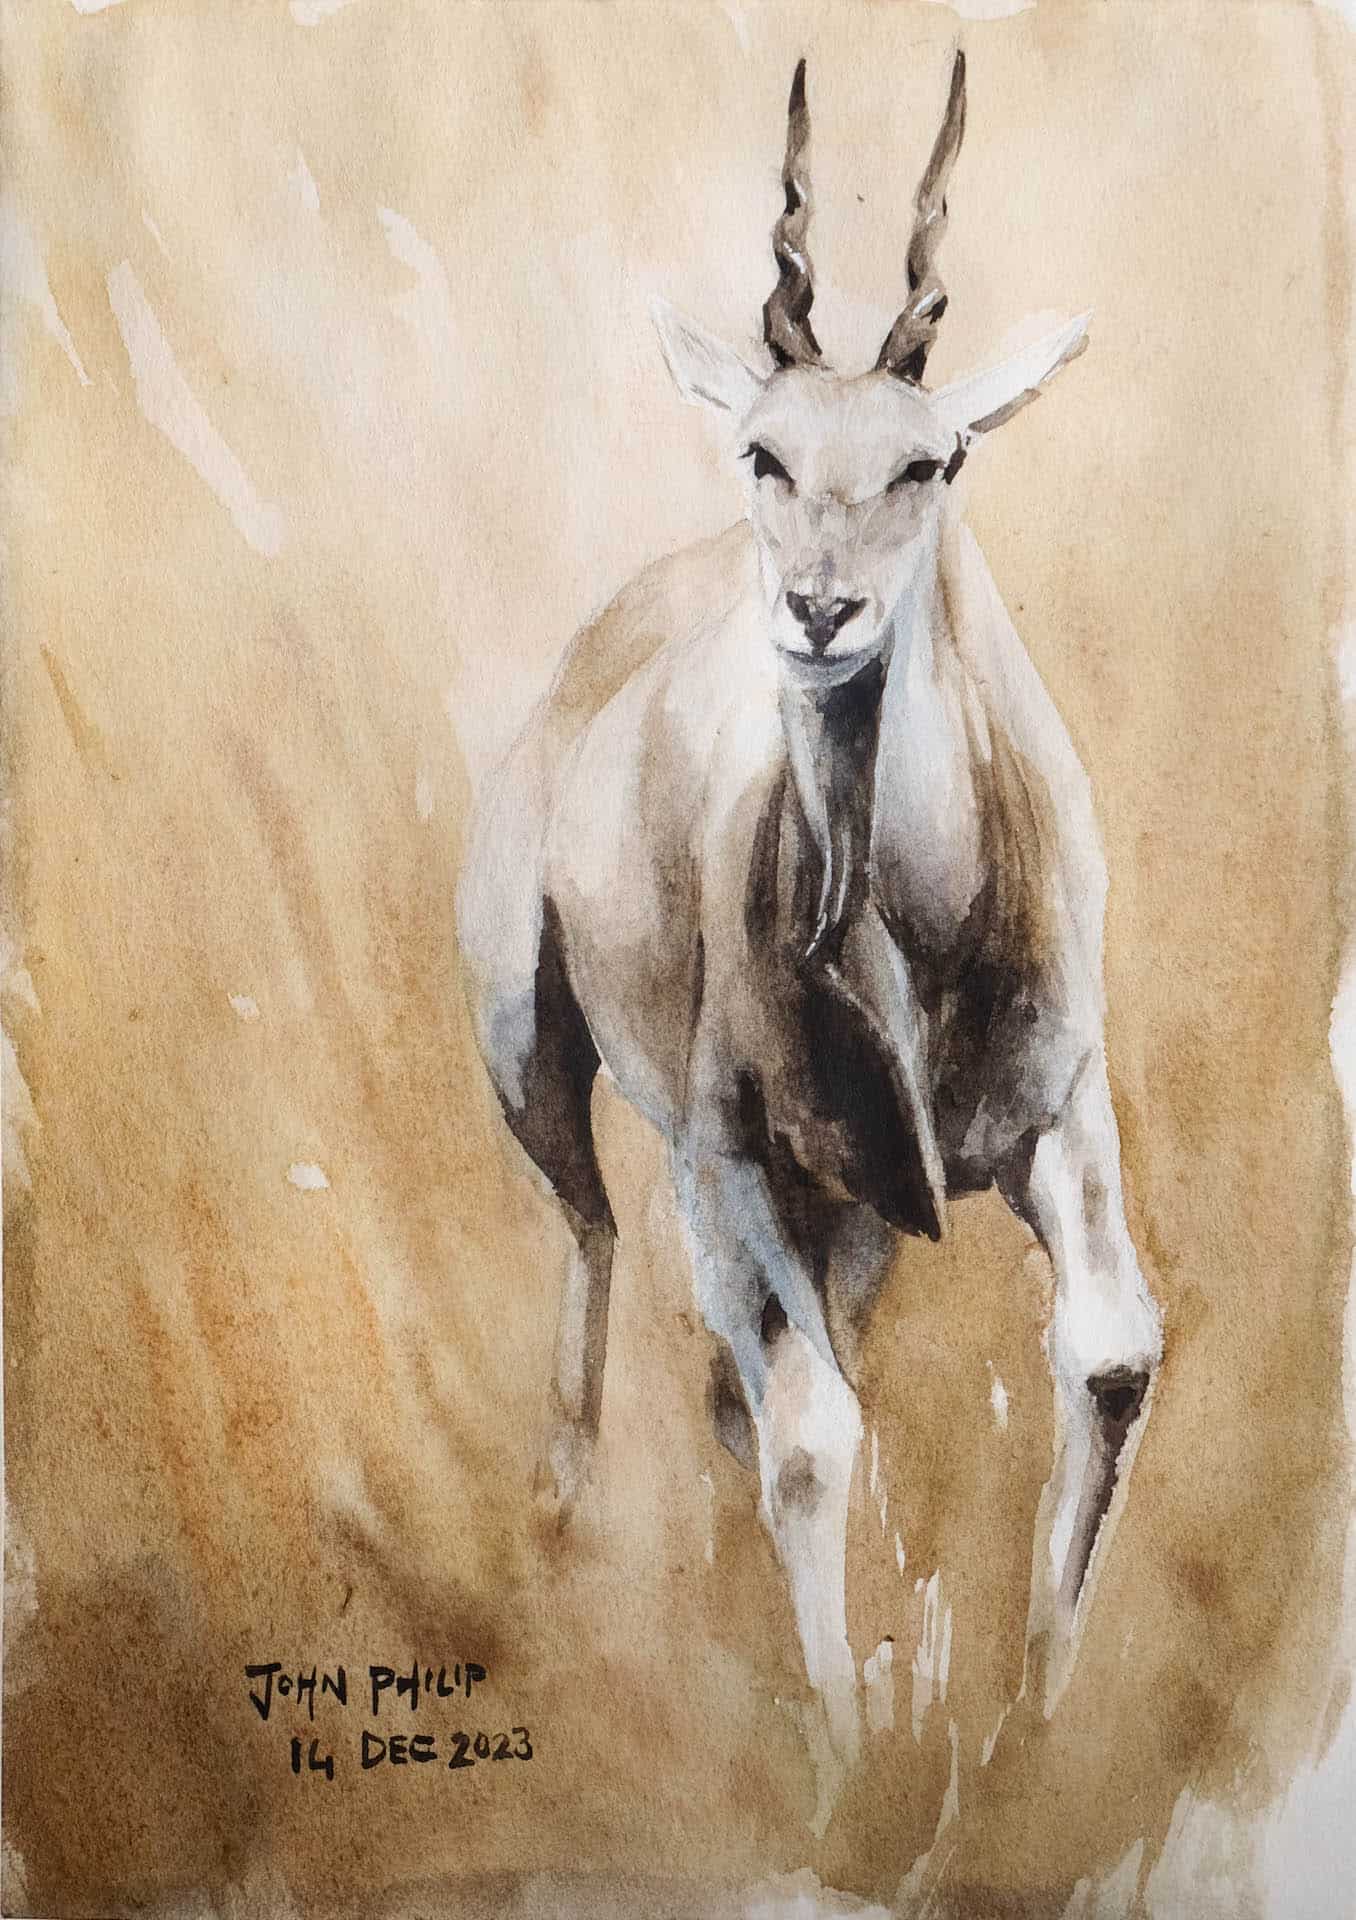 Painting of an Eland on running.